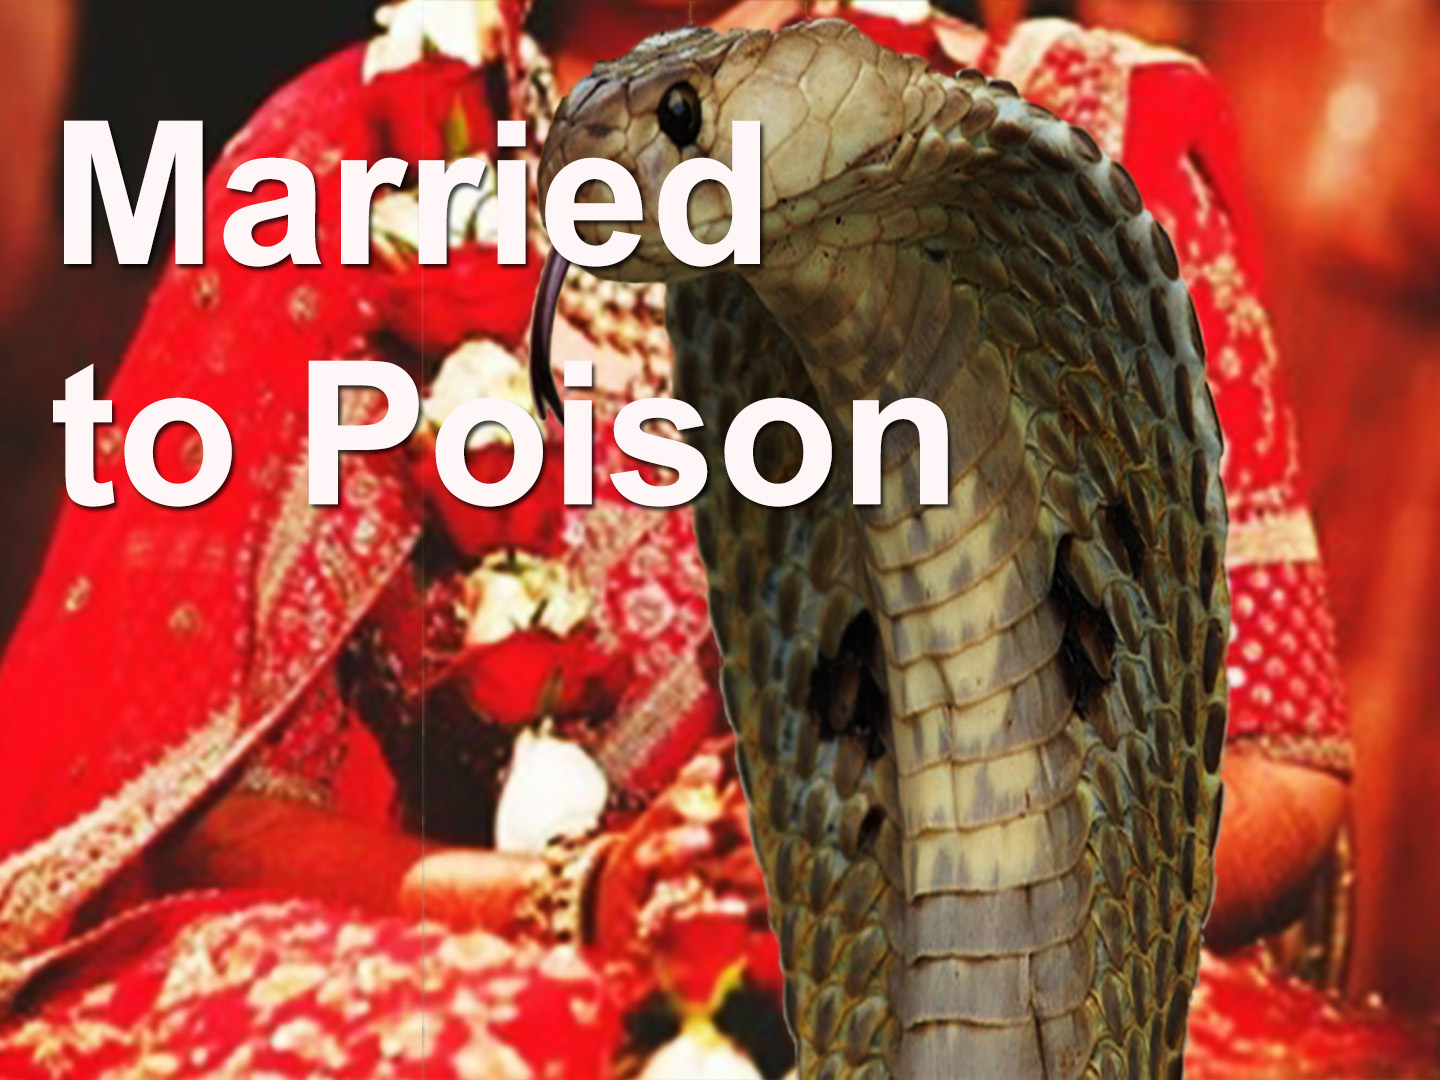 Married to Poison